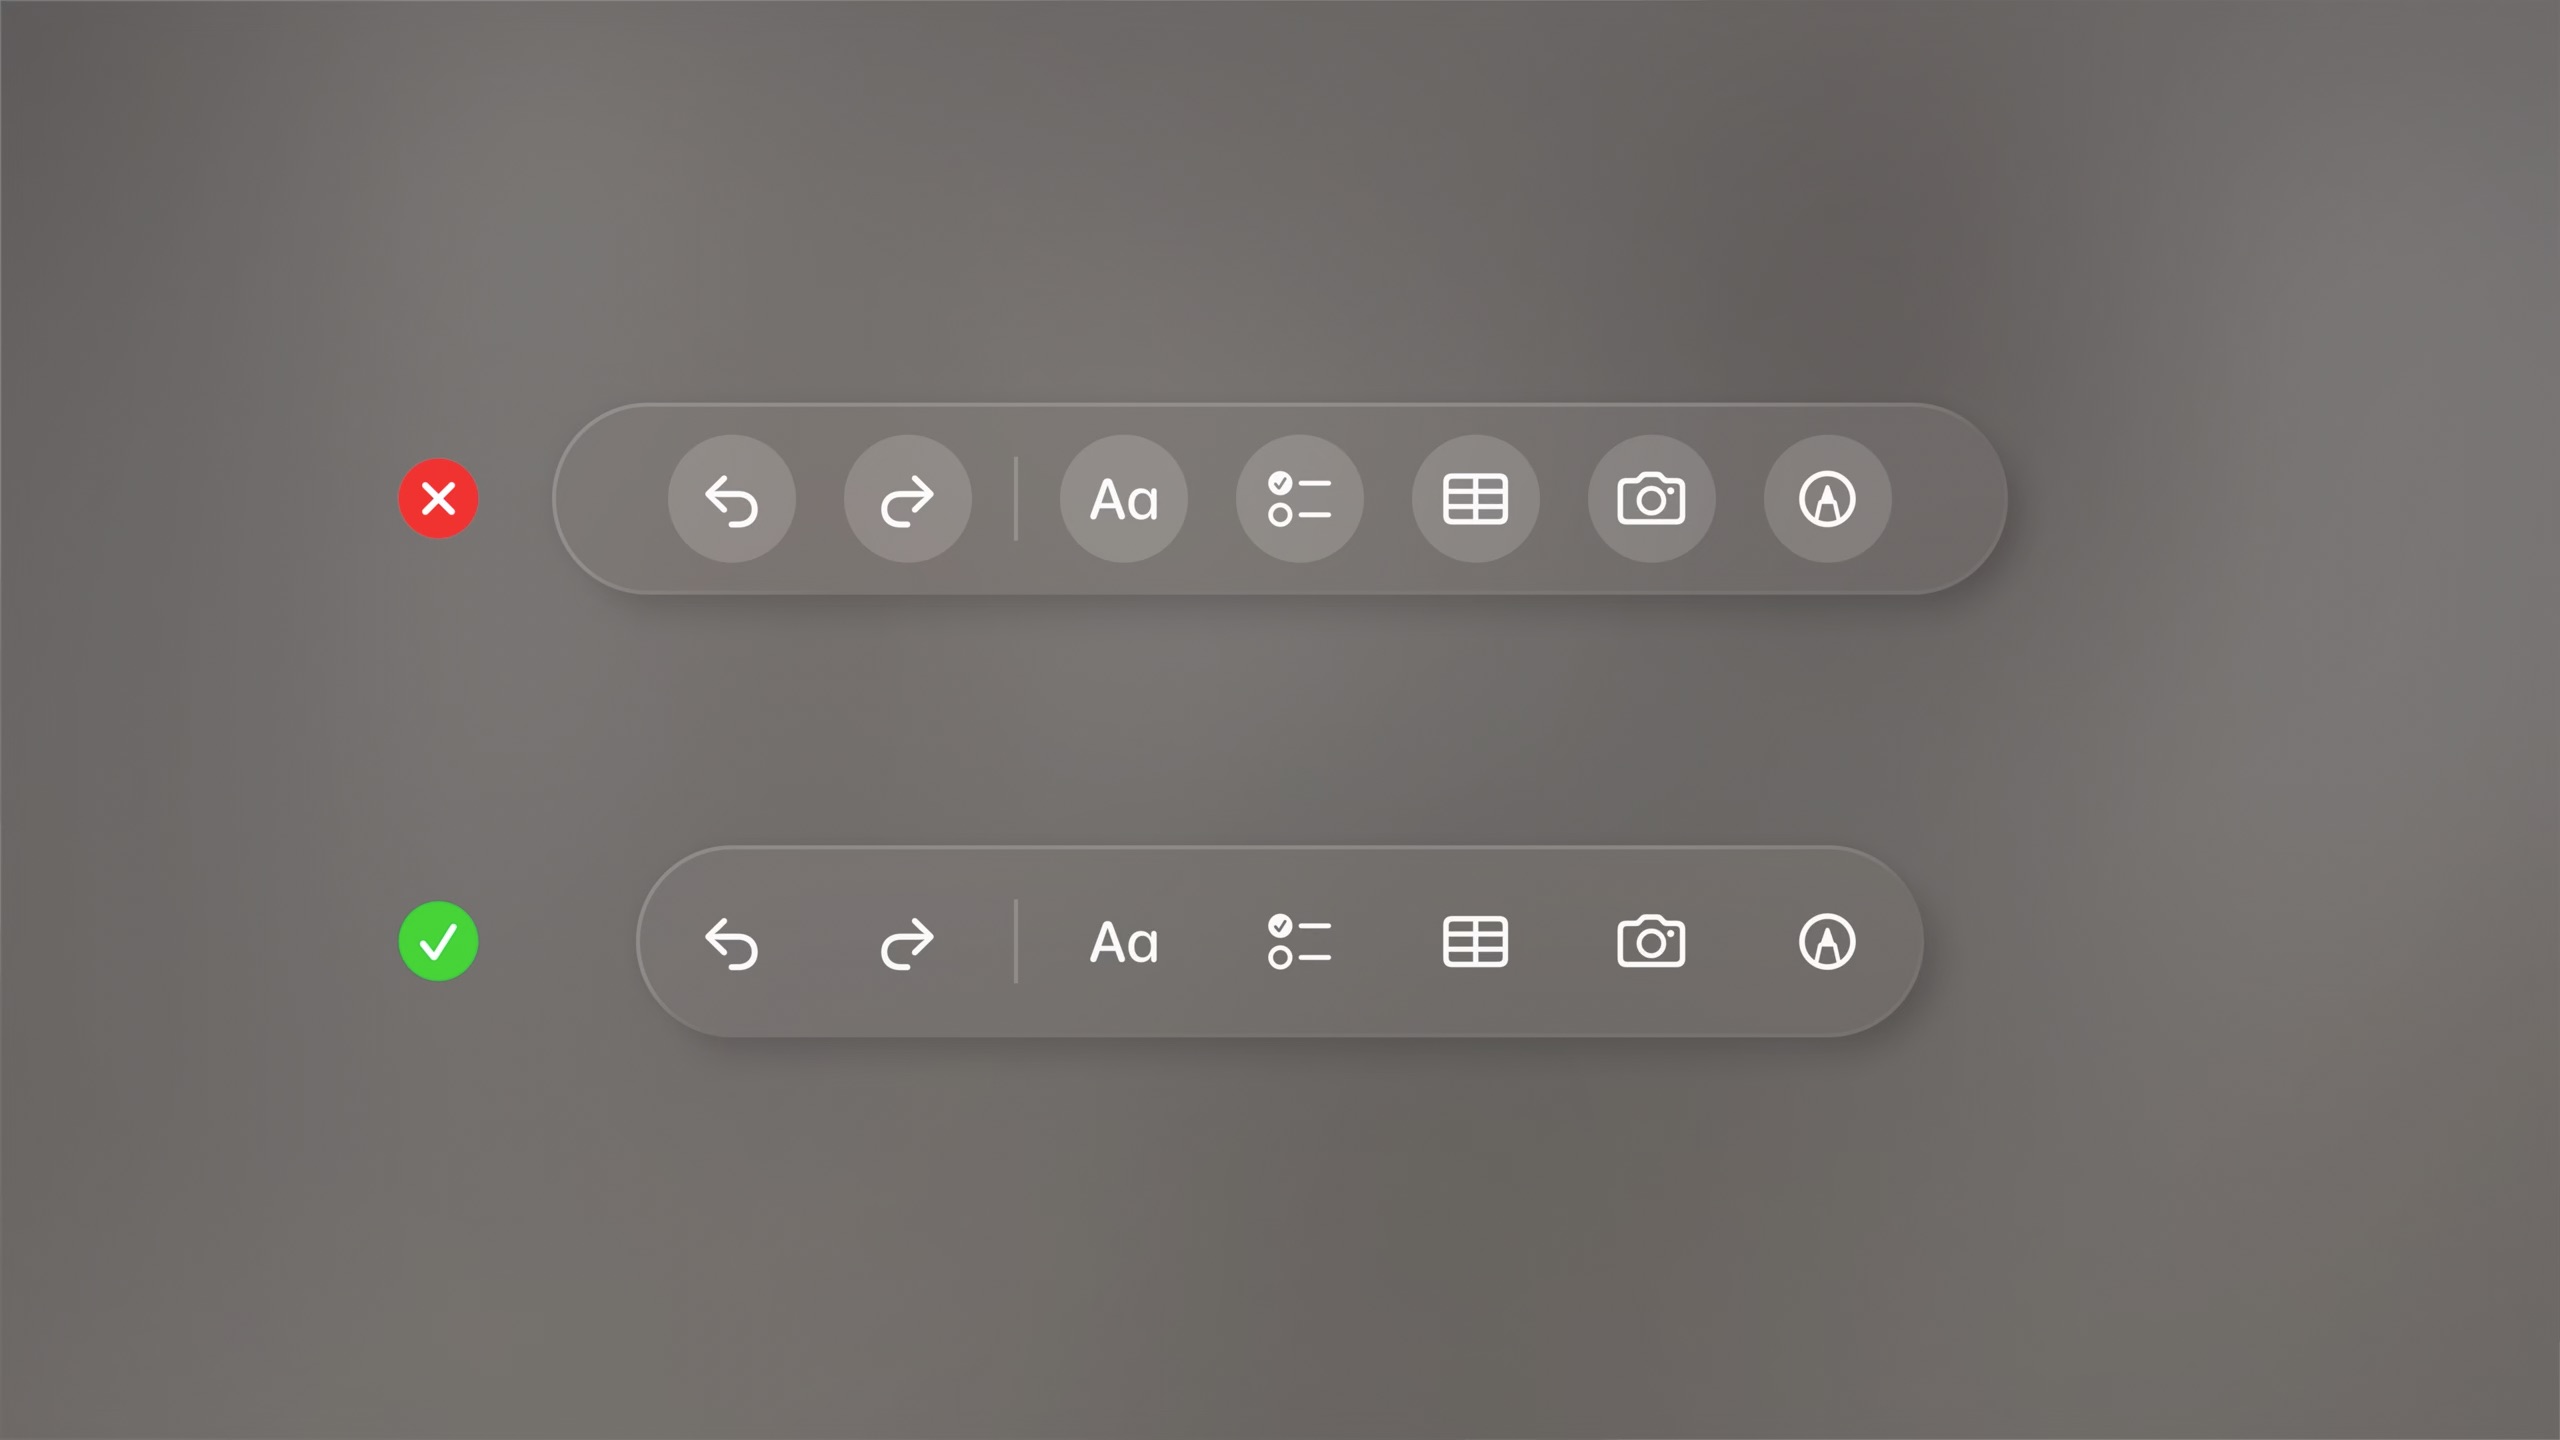 Don't: Add border around icons in ornaments, Do: use borderless buttons in ornaments